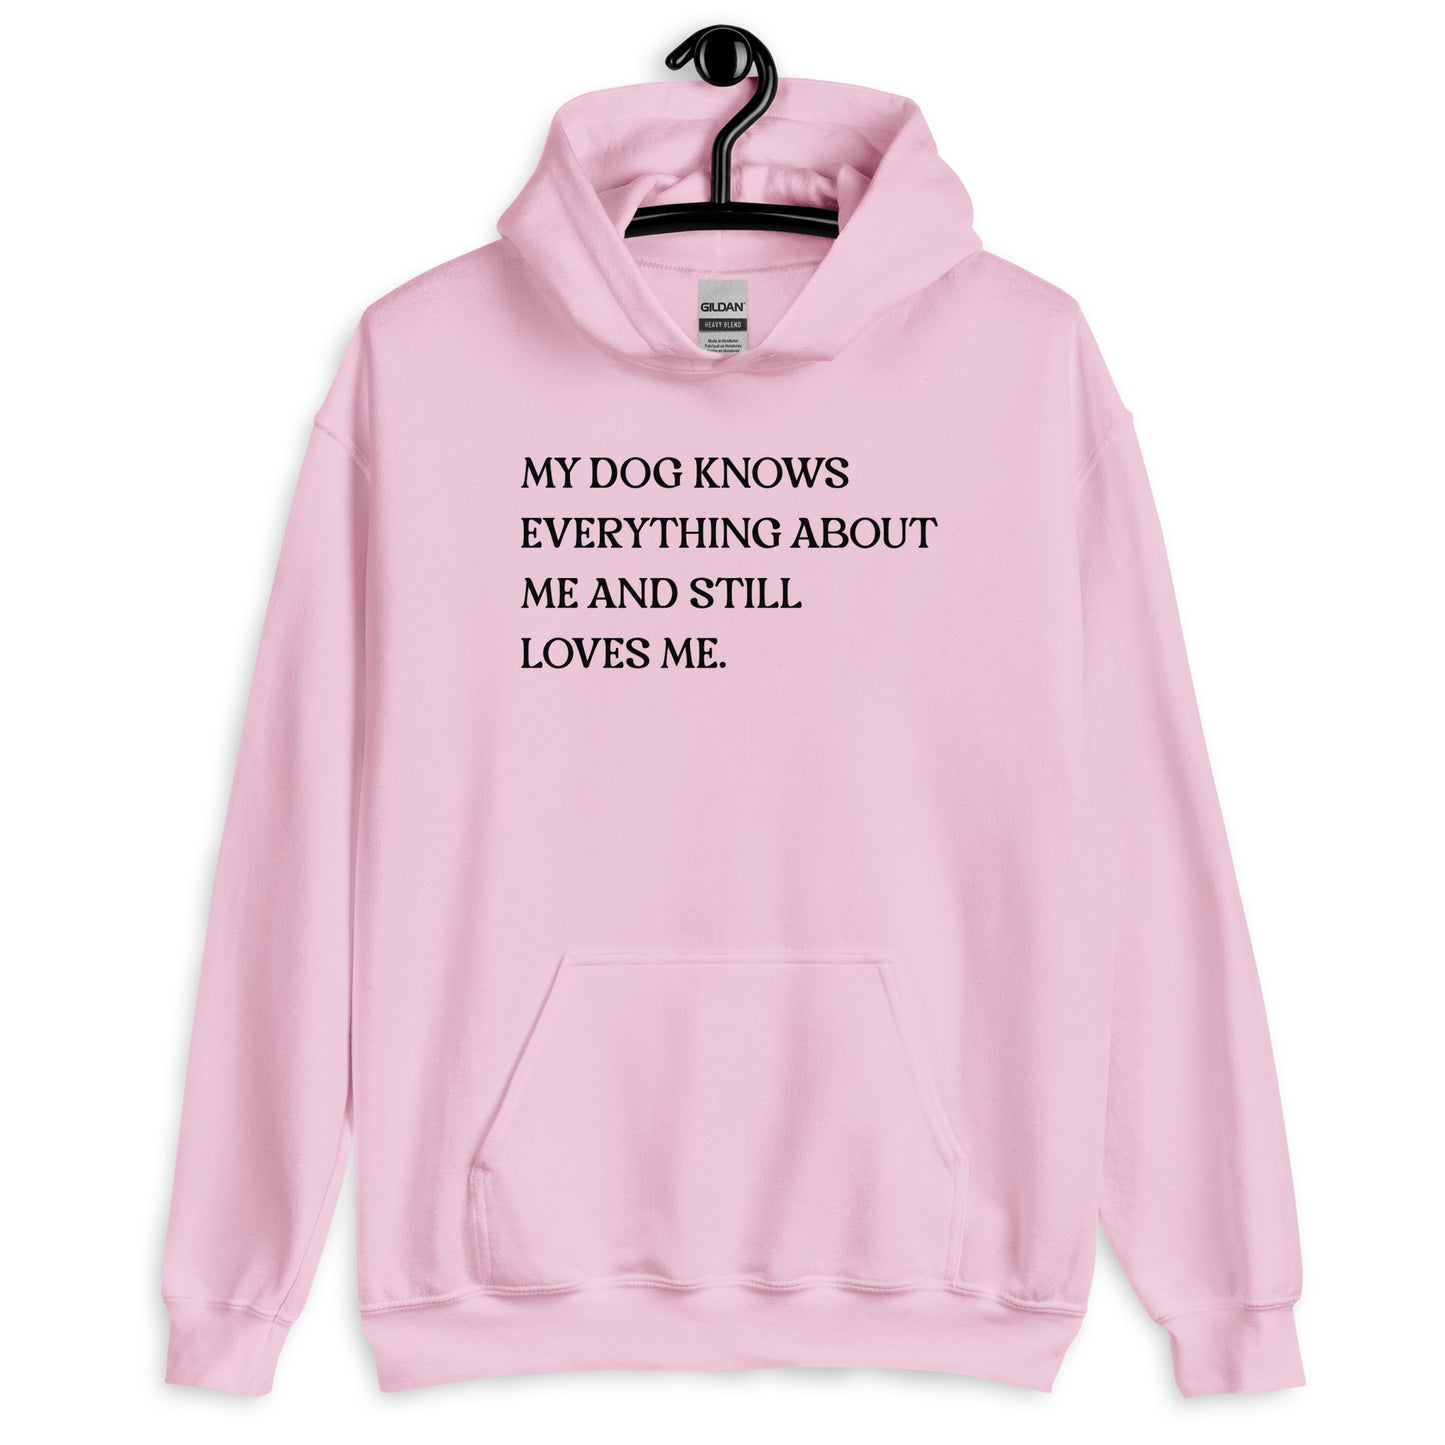 My Dog Knows Everything About Me and Still Loves Me Unisex Hoodie